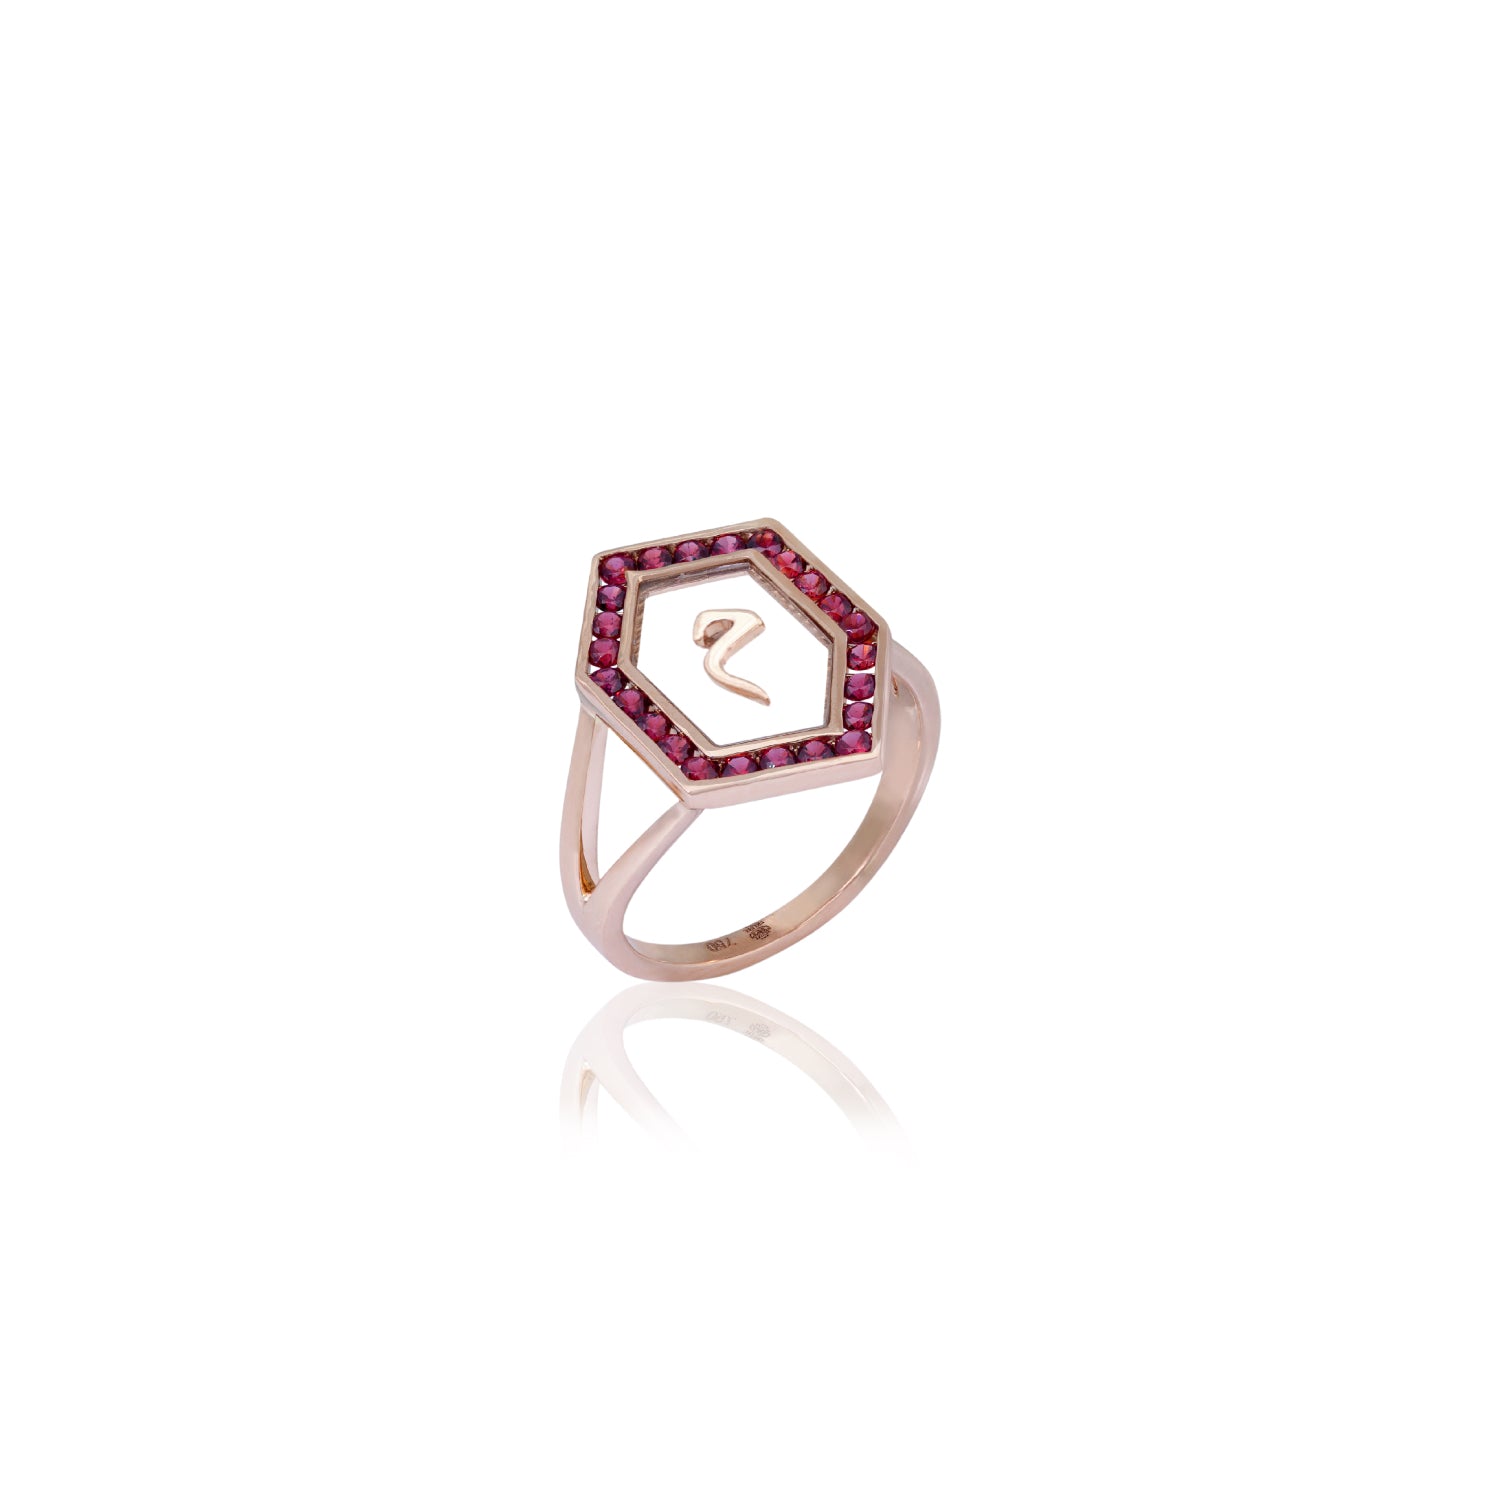 Qamoos 1.0 Letter م Ruby Ring in Rose Gold